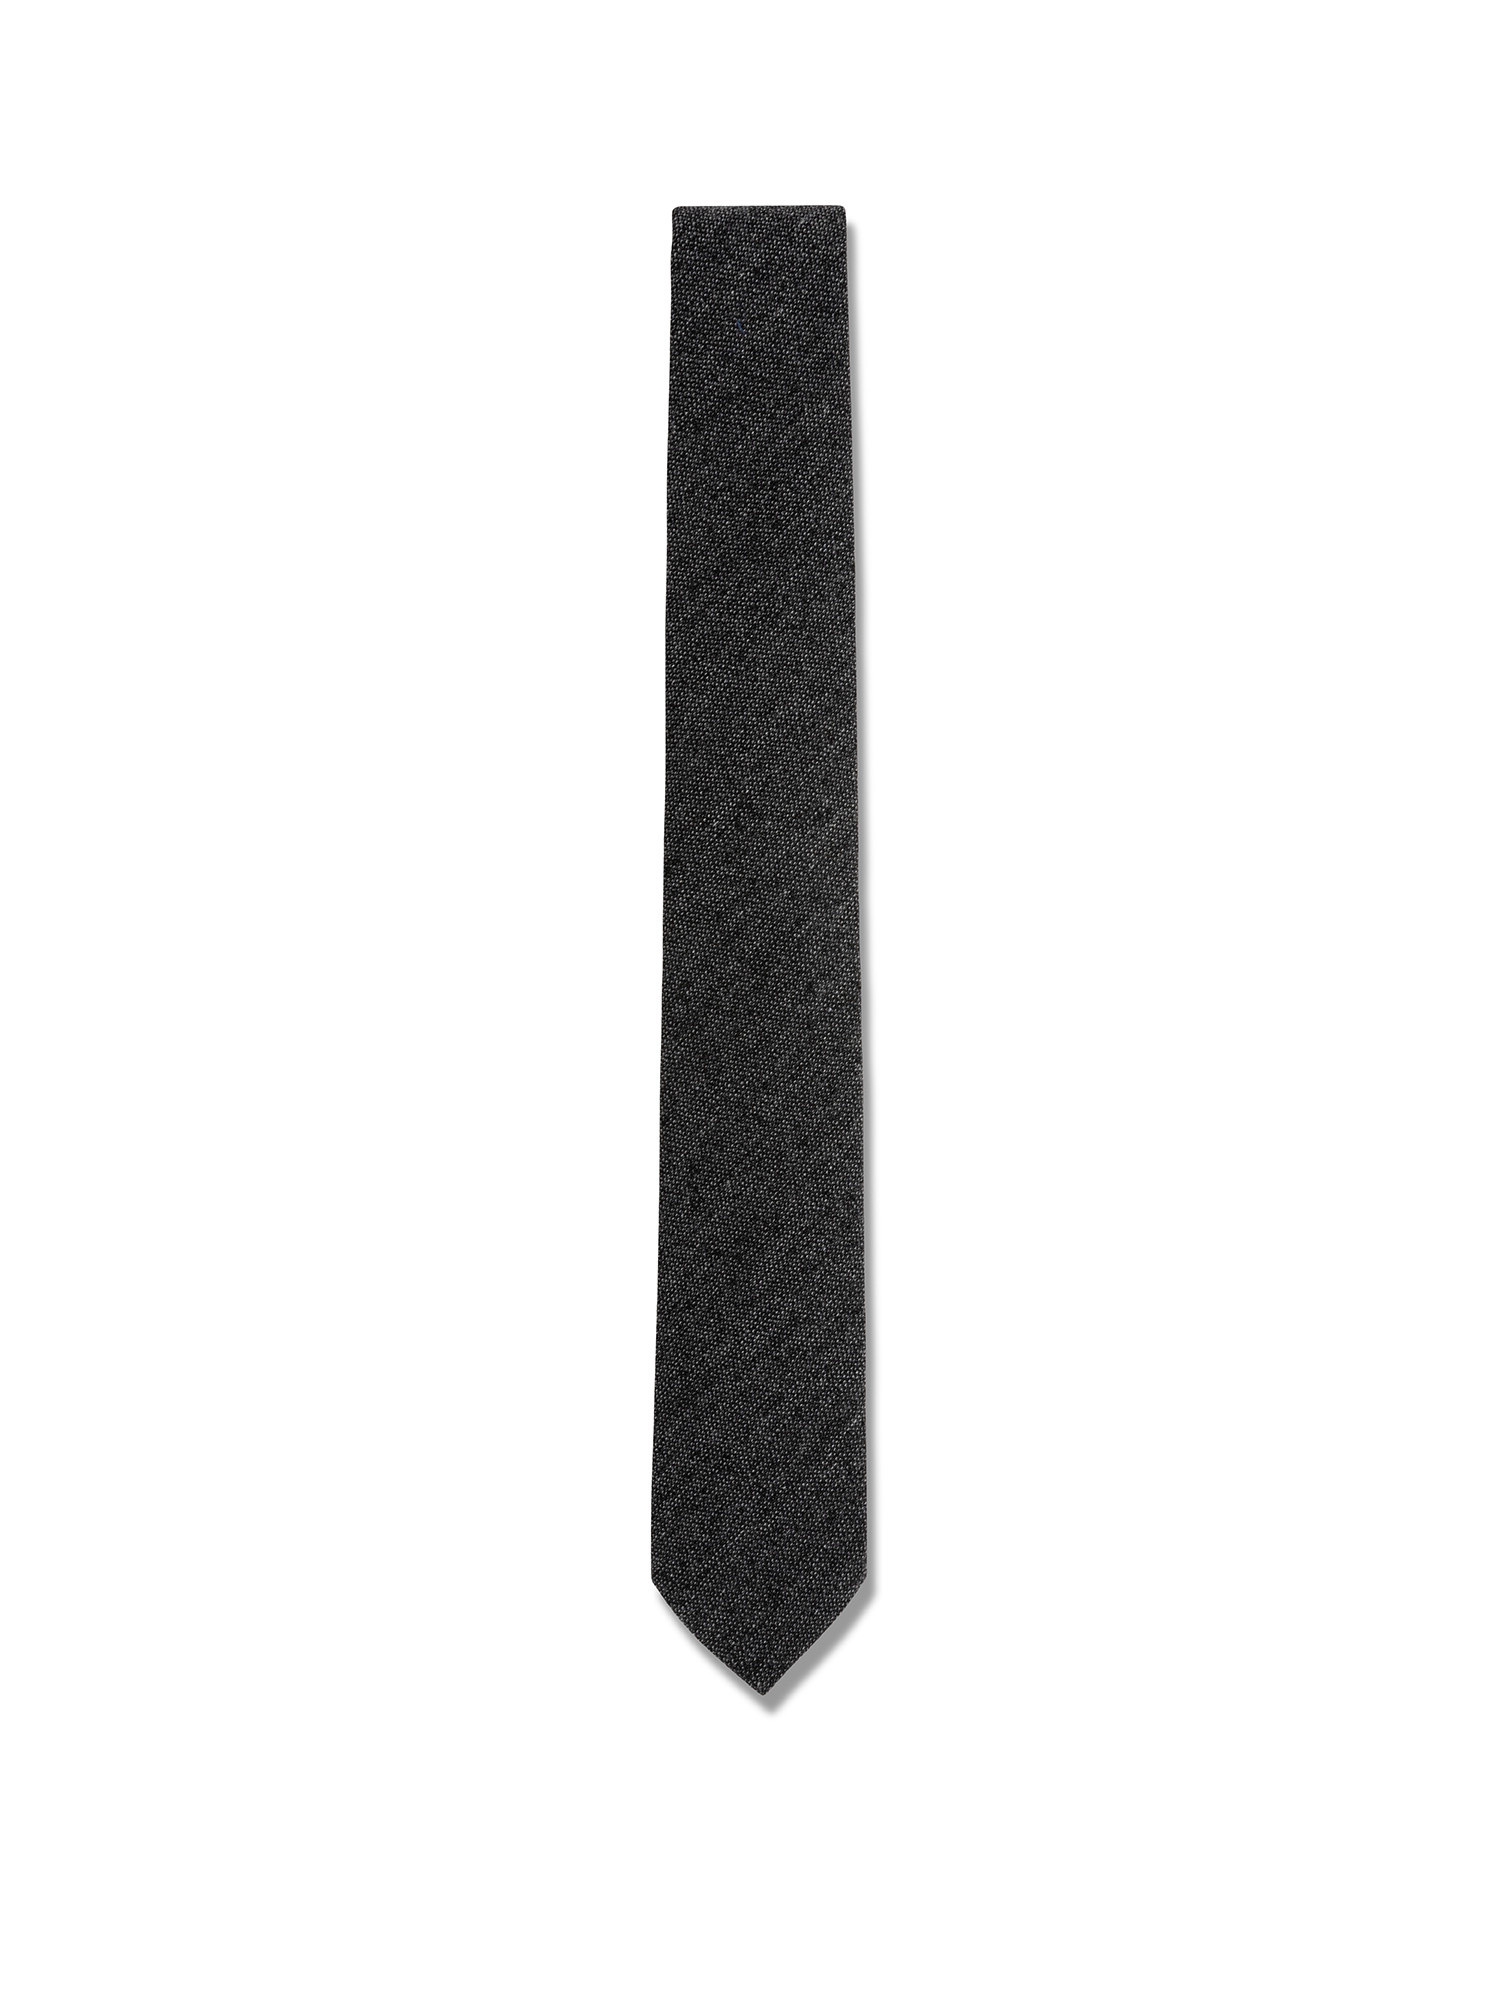 Luca D'Altieri - Patterned wool and silk tie, Anthracite, large image number 1